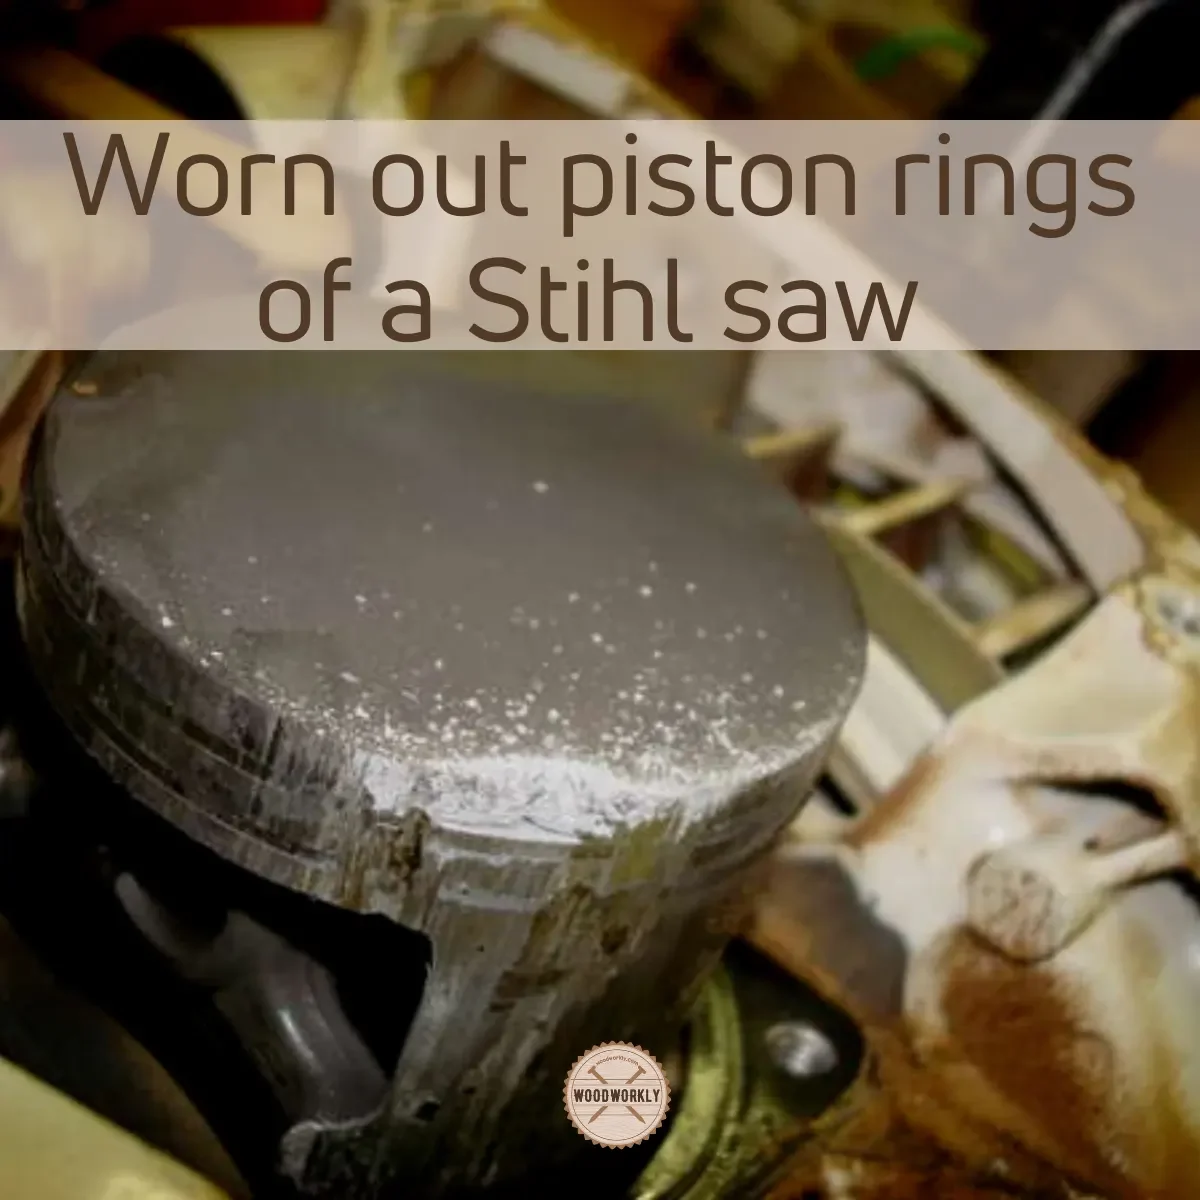 Worn out piston rings of a Stihl saw